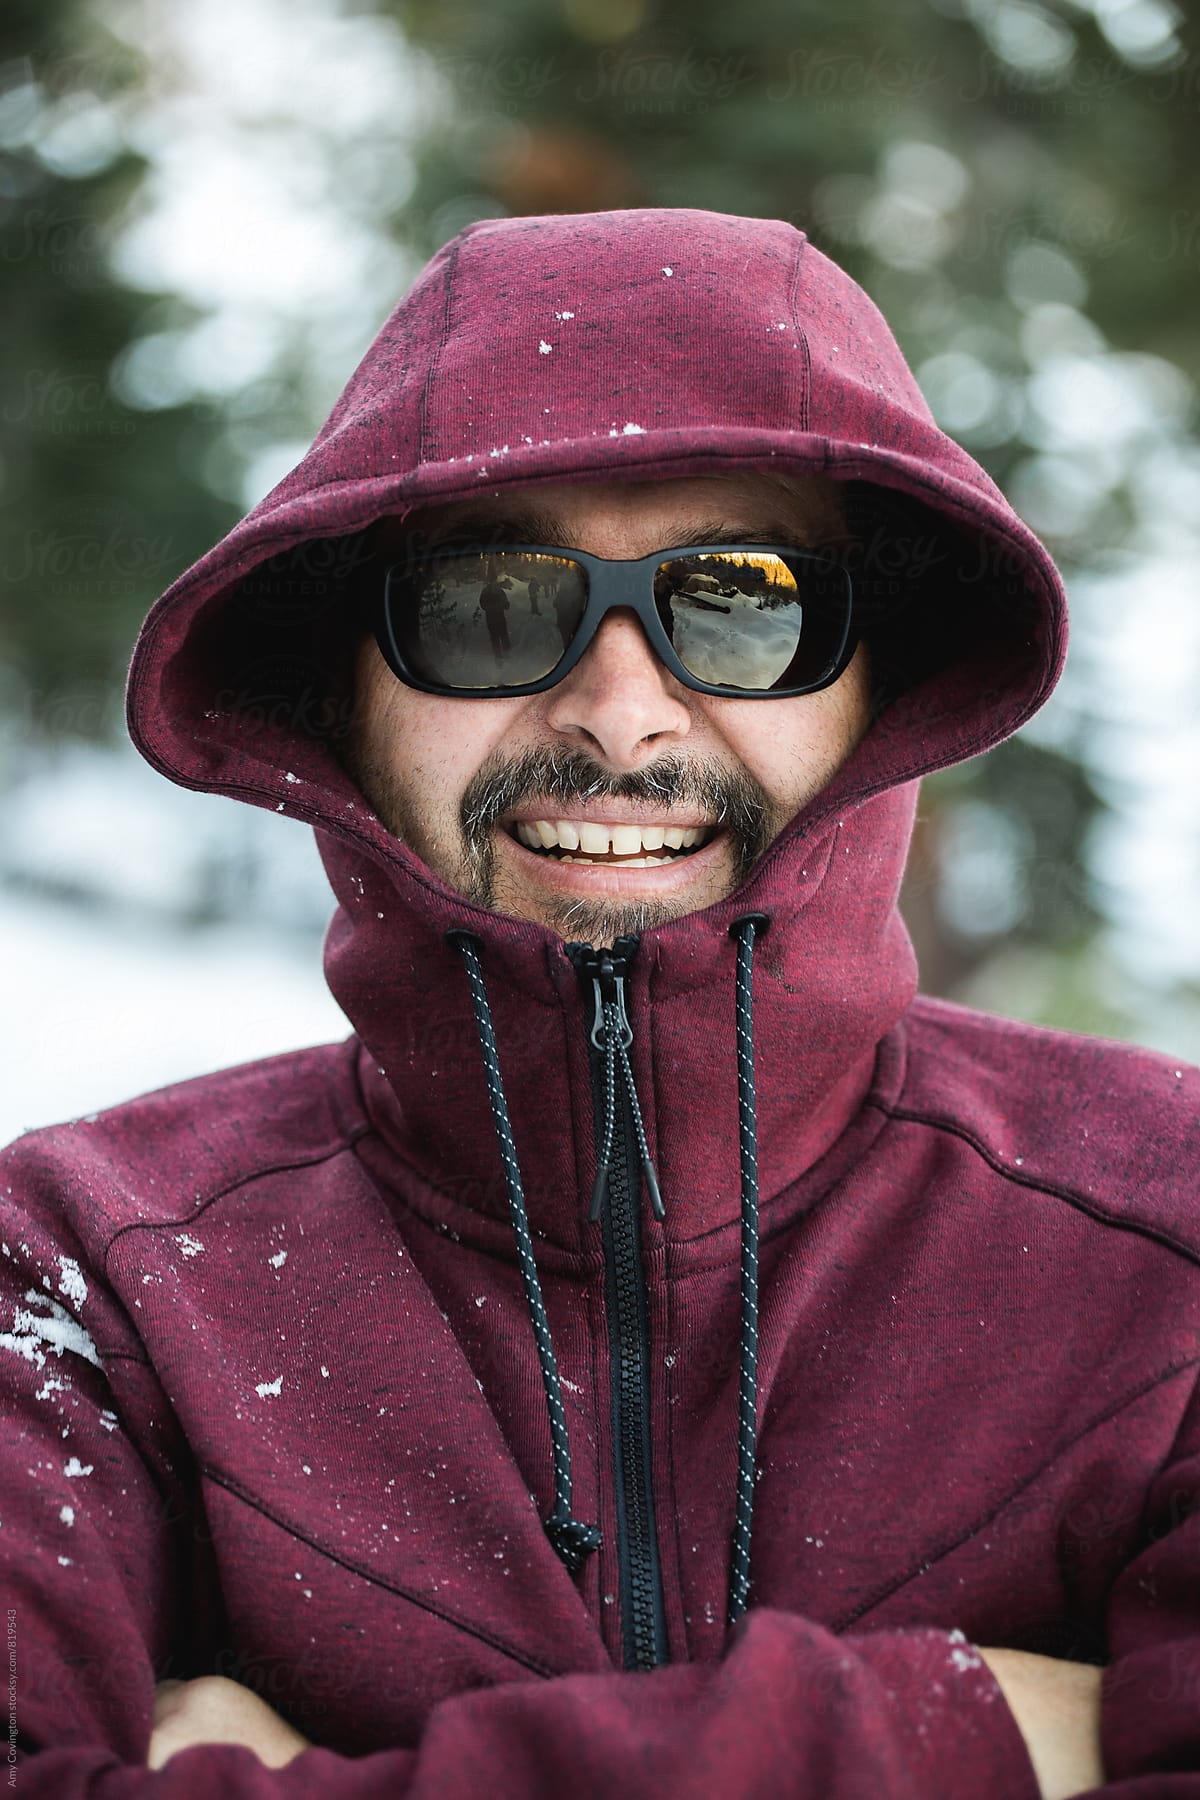 Man wearing a zipped up jacket and sunglasses smiling in the snow